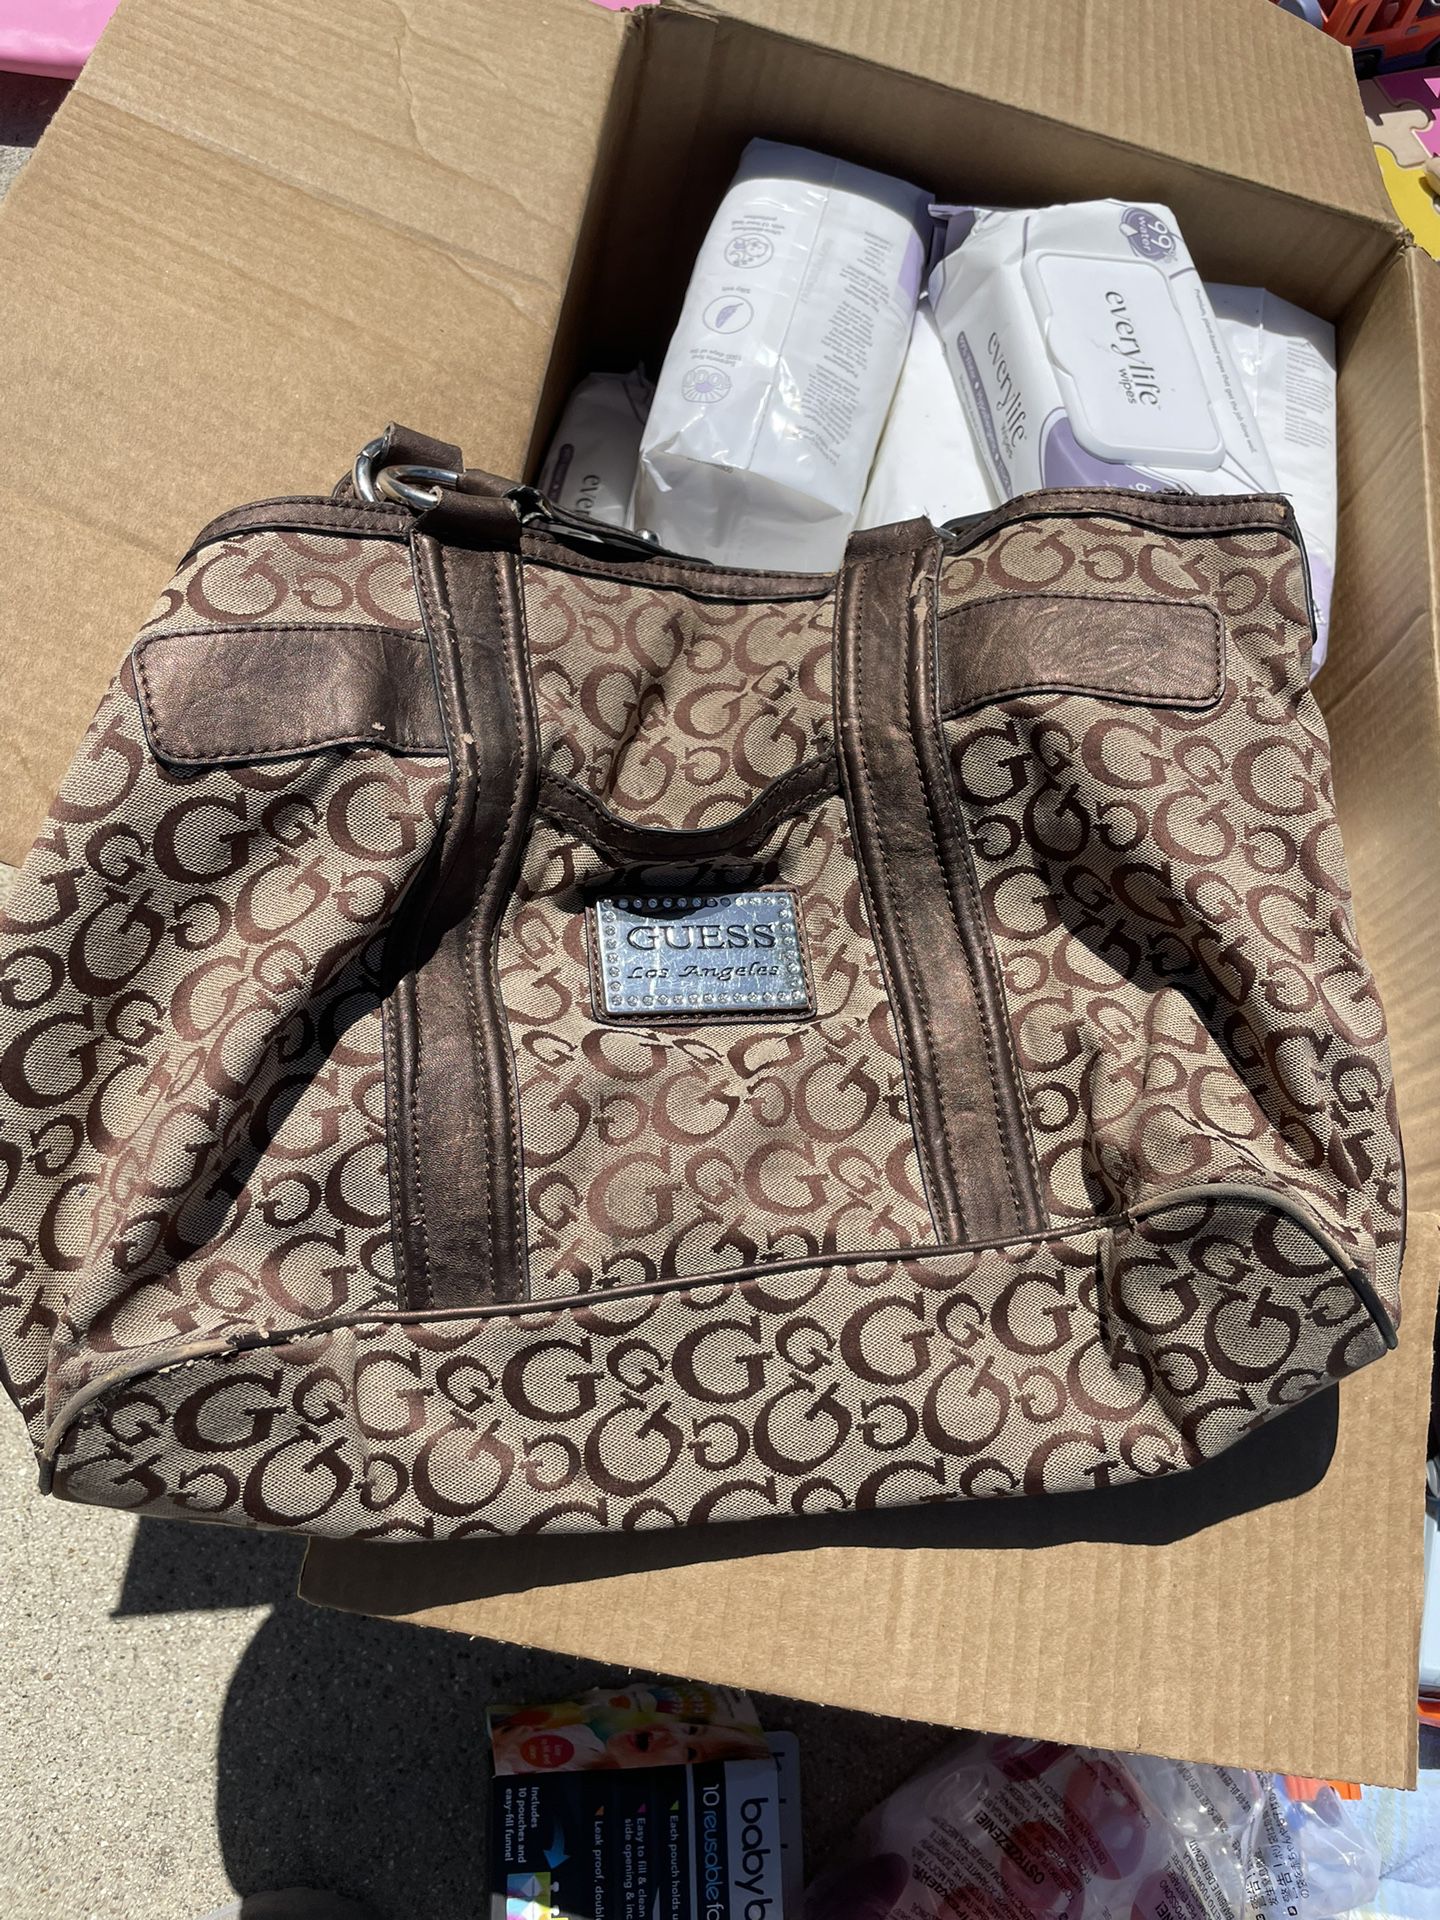 Brown Guess Purse